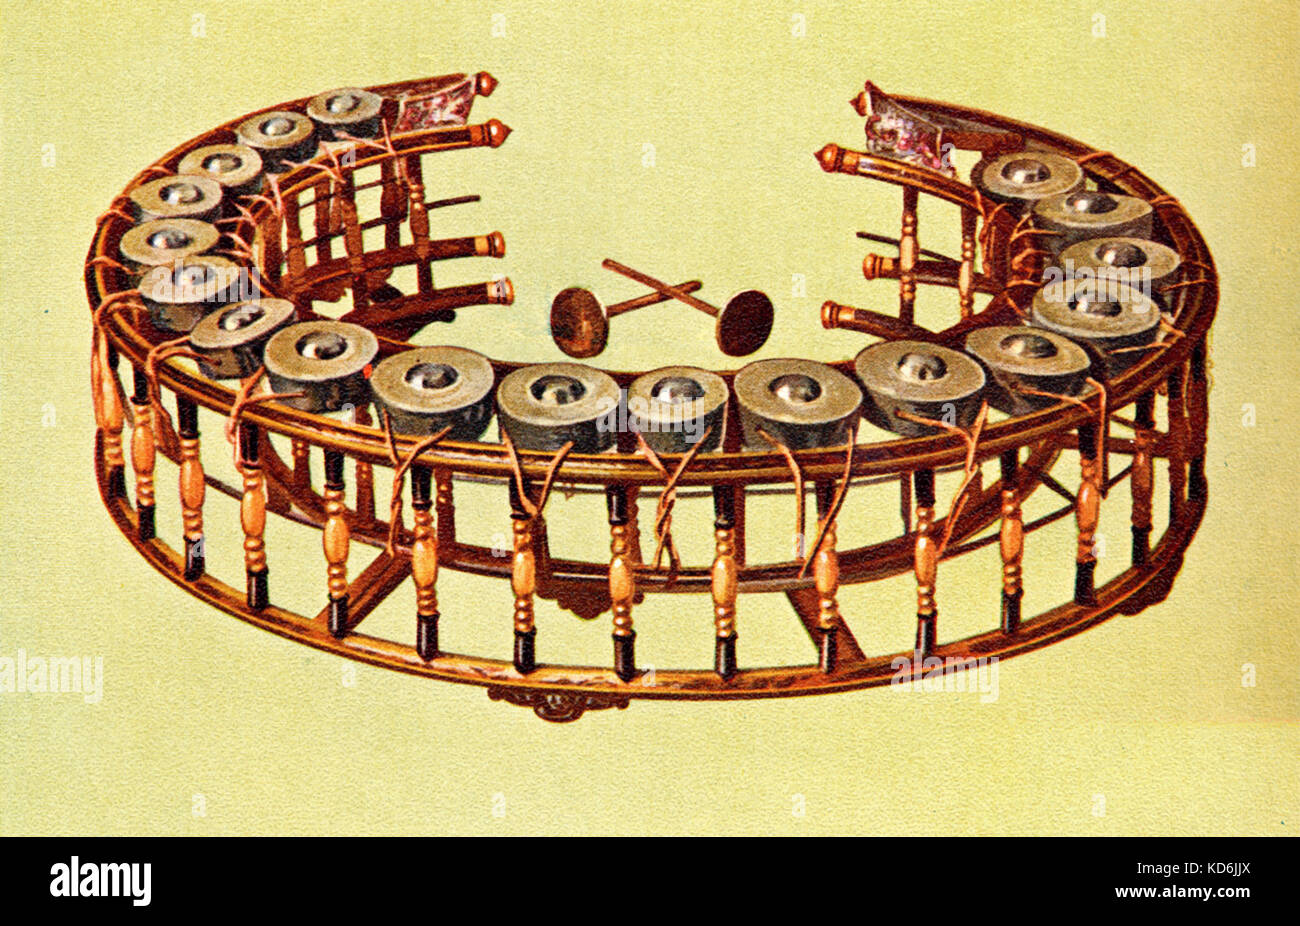 Khong Tai of eighteen metal kettles, of a kind of bronze or bell metal known as 'gongsa', in an ivory stand painted like tortoise-shell with brass edgings.   Instrument belongs to His Majesty the King of Siam. Drawn by Hipkins, 1921. Stock Photo